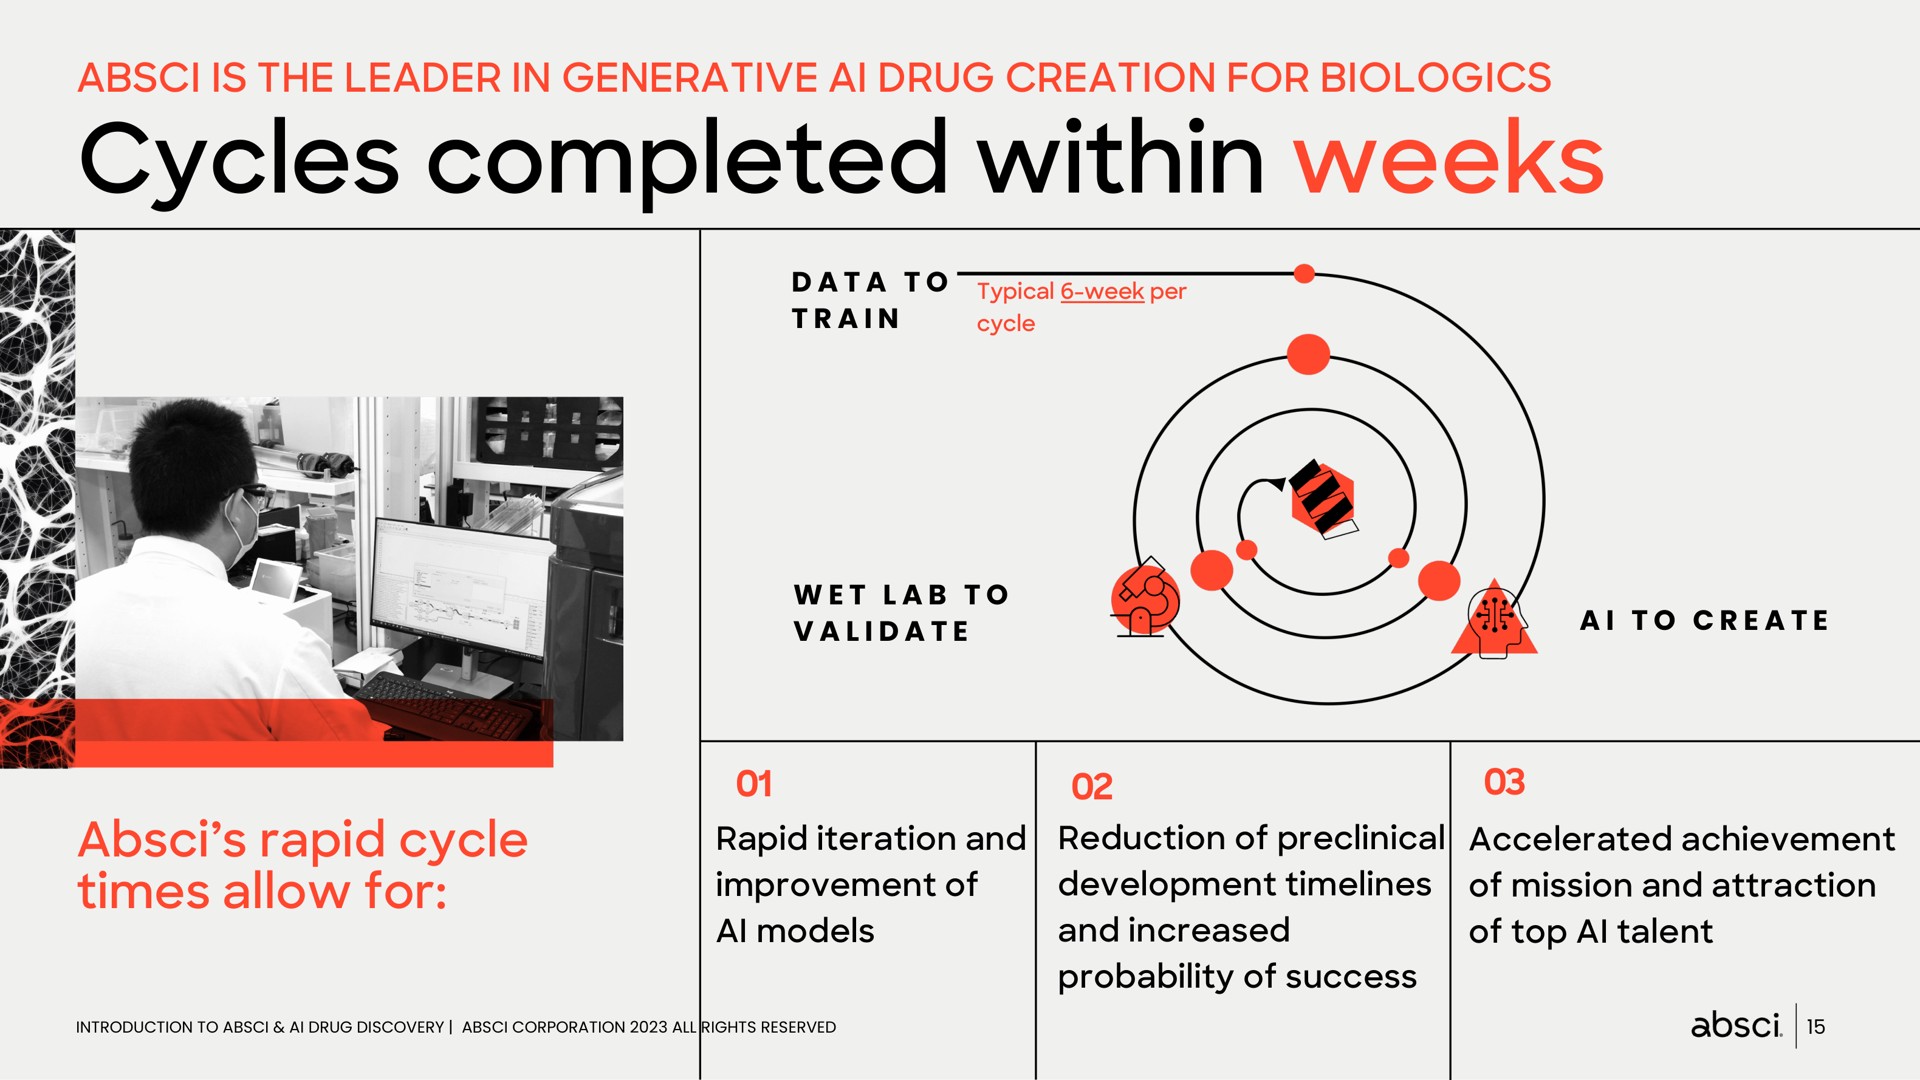 is the leader in generative drug creation for cycles completed within weeks rapid cycle times allow for | Absci